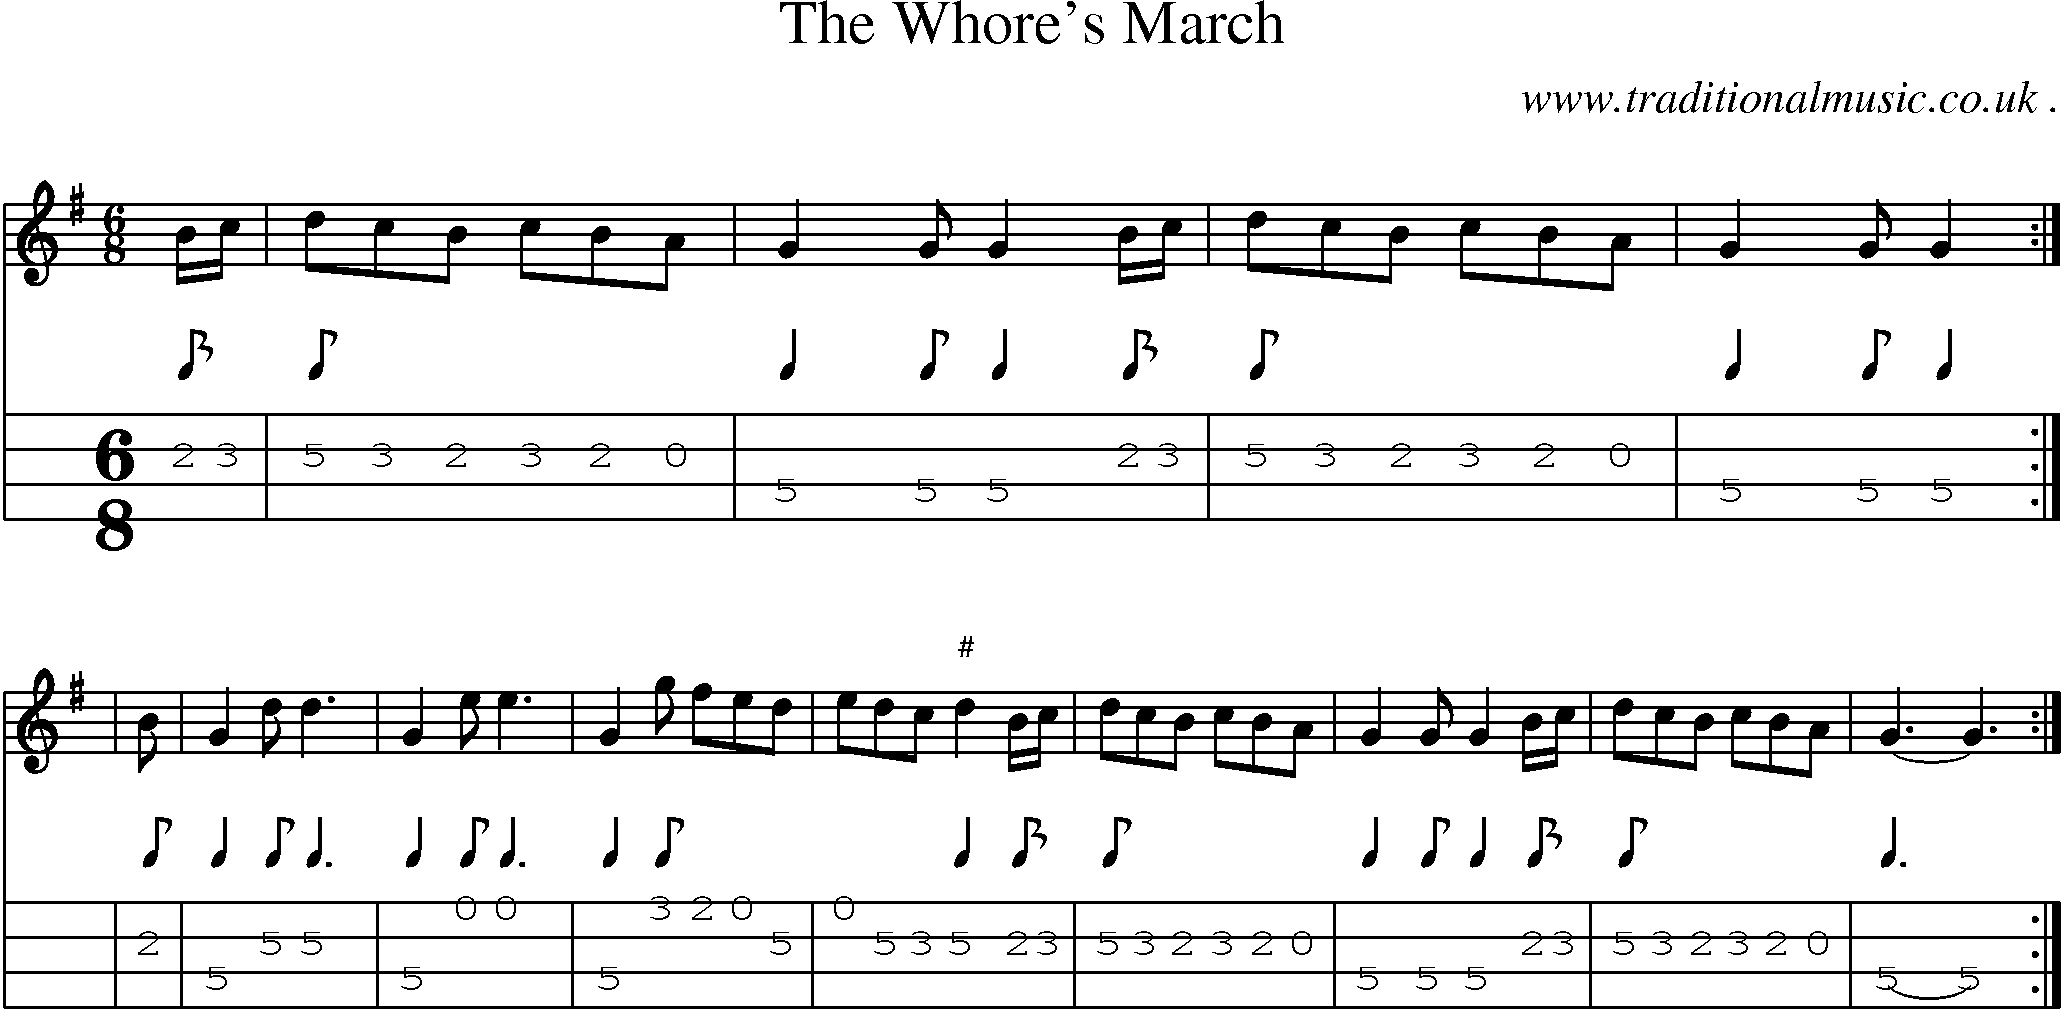 Sheet-music  score, Chords and Mandolin Tabs for The Whores March